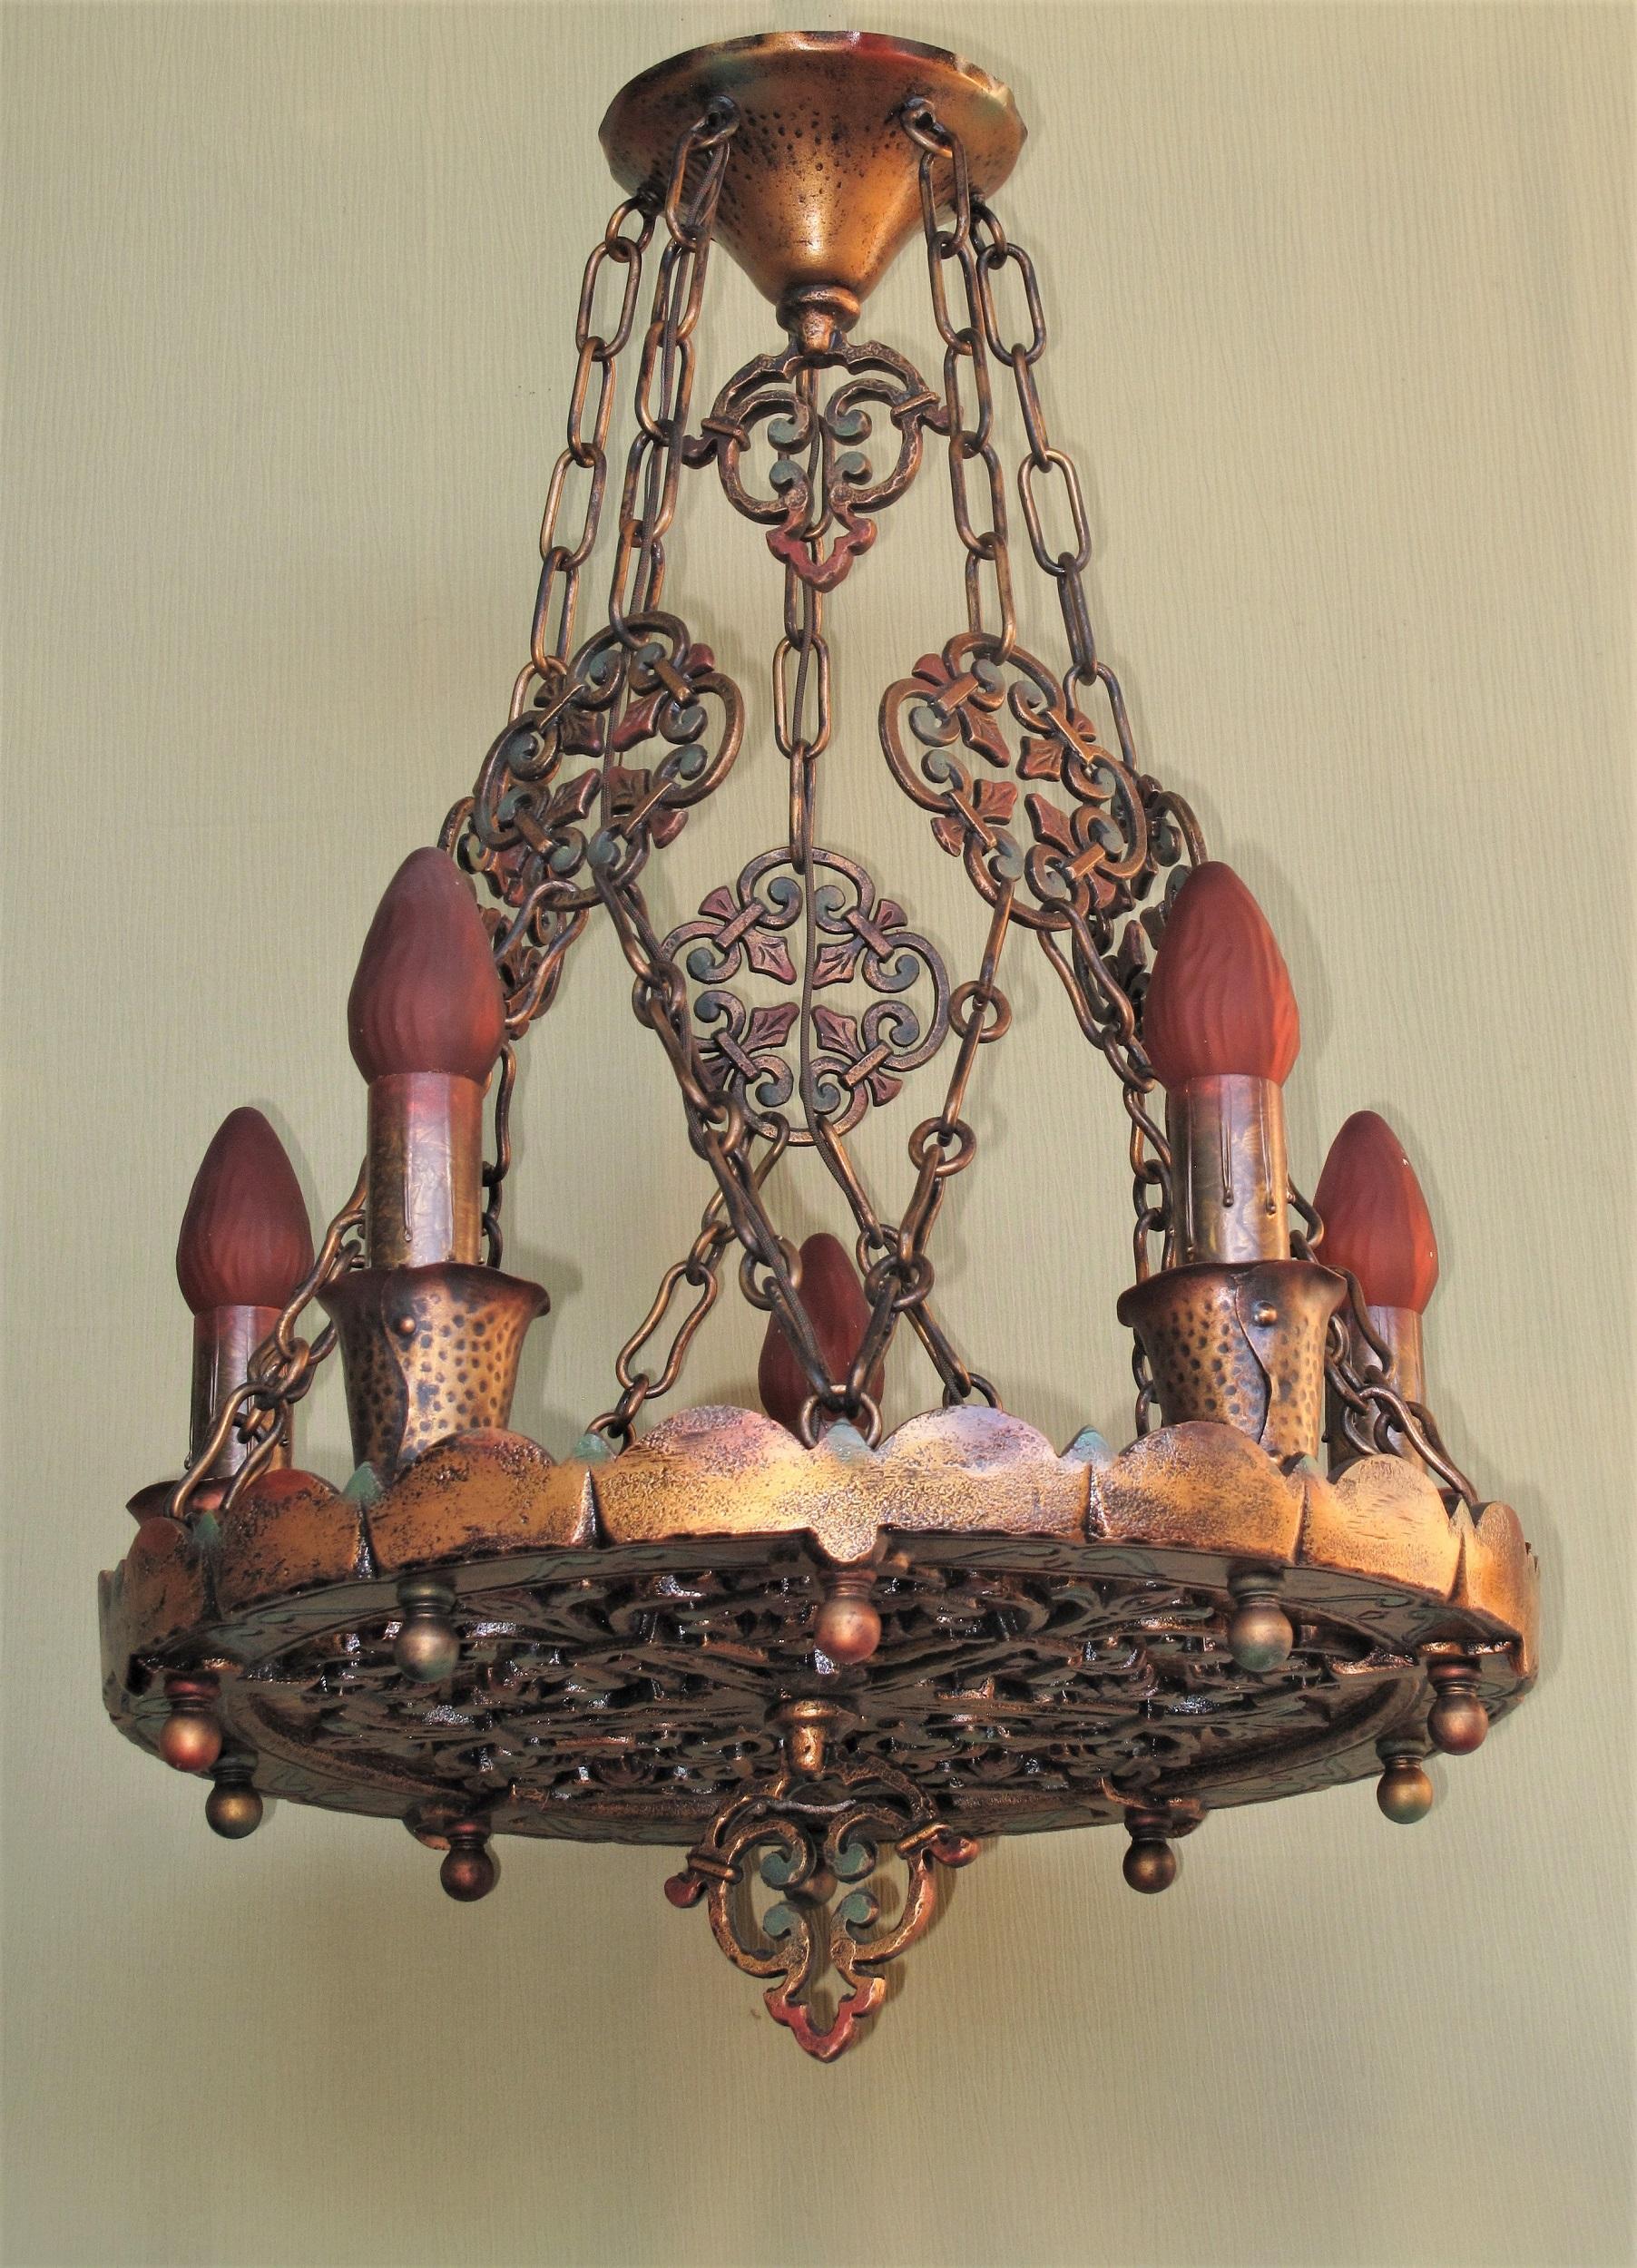 American Massive Spanish Revival Chandelier with Four Matching Sconces